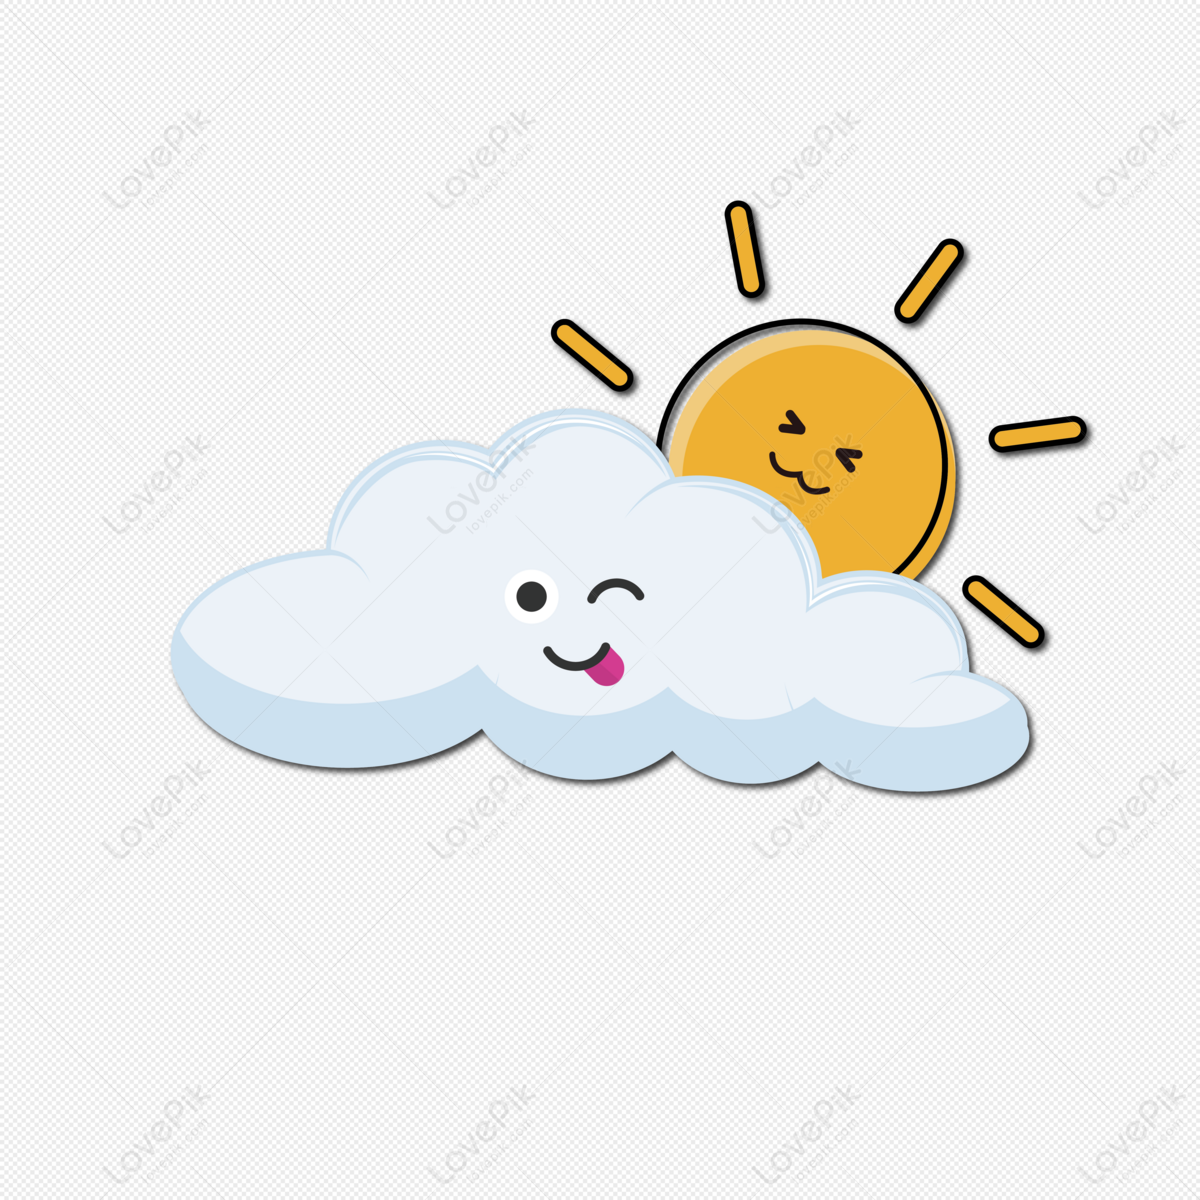 Hand Drawn Cartoon Sun Cloud Download PNG Image And Clipart Image For Free  Download - Lovepik | 401178388